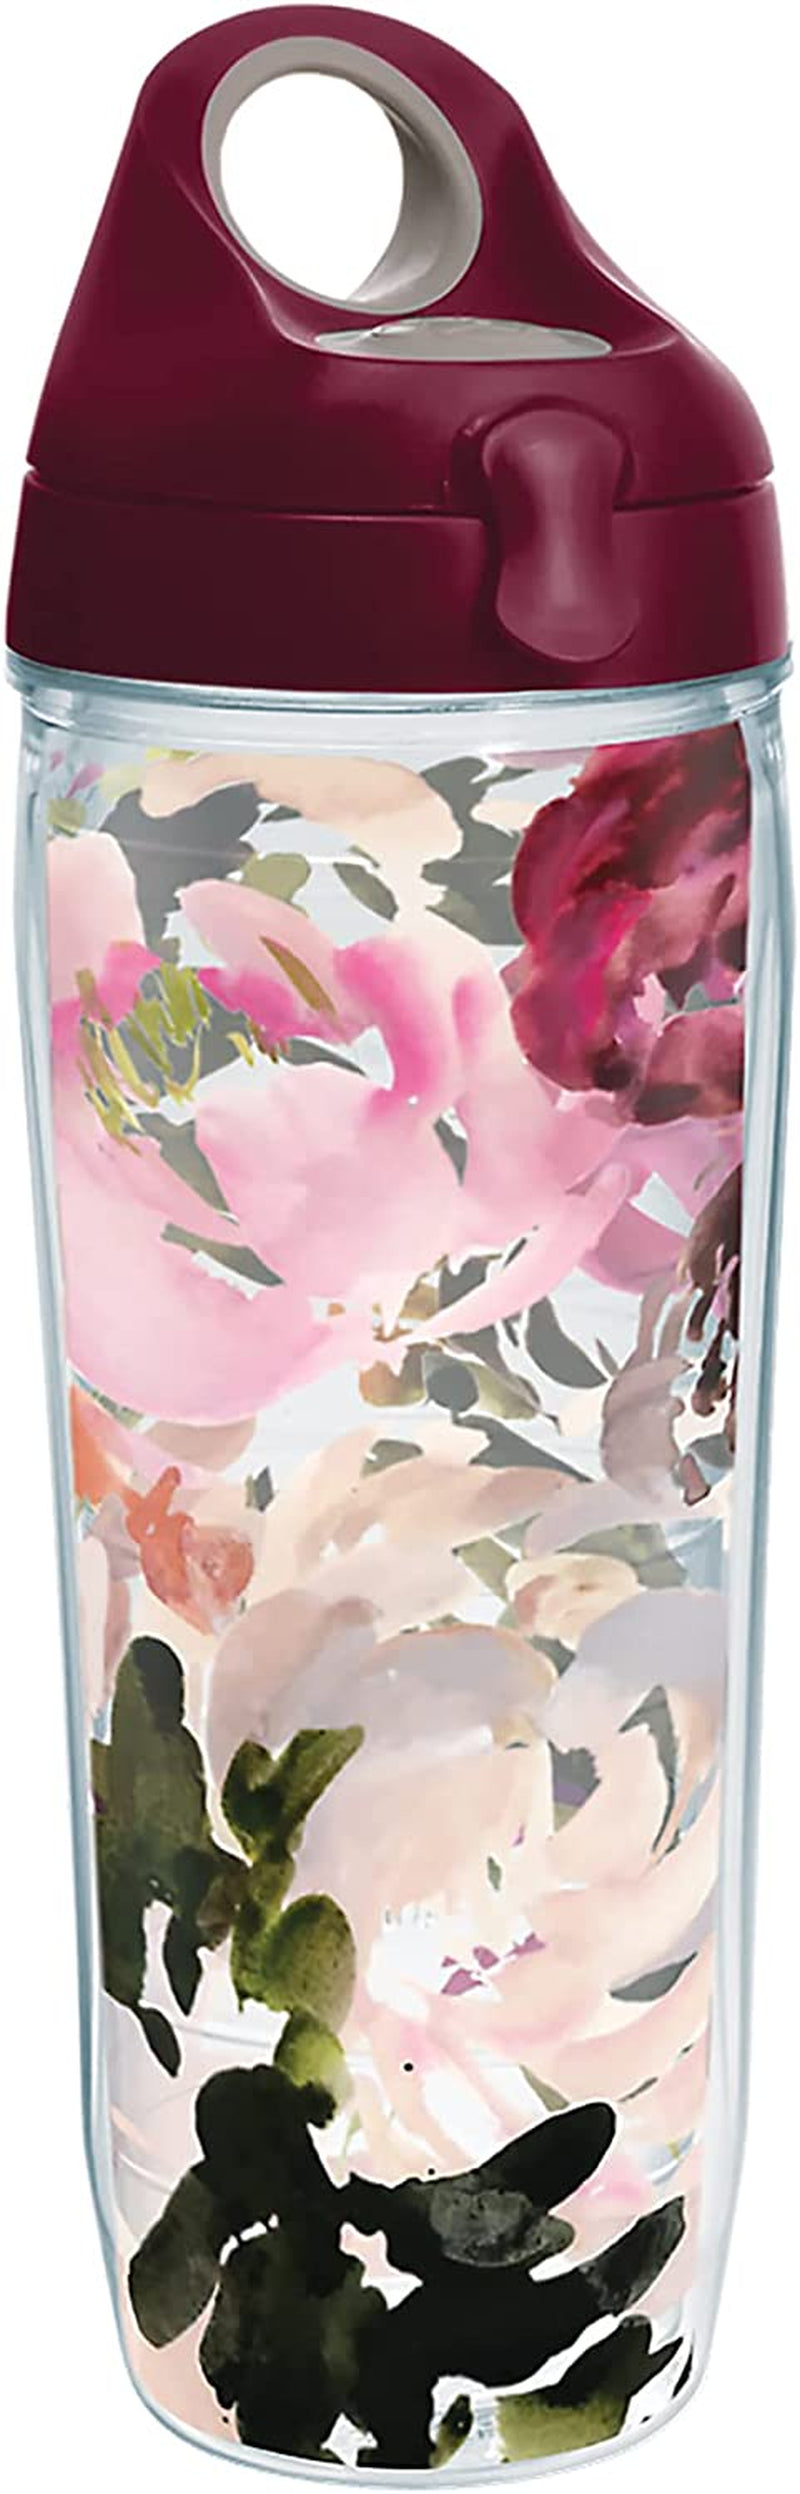 Tervis Made in USA Double Walled Kelly Ventura Floral Collection Insulated Tumbler Cup Keeps Drinks Cold & Hot, 16Oz 4Pk - Classic, Assorted